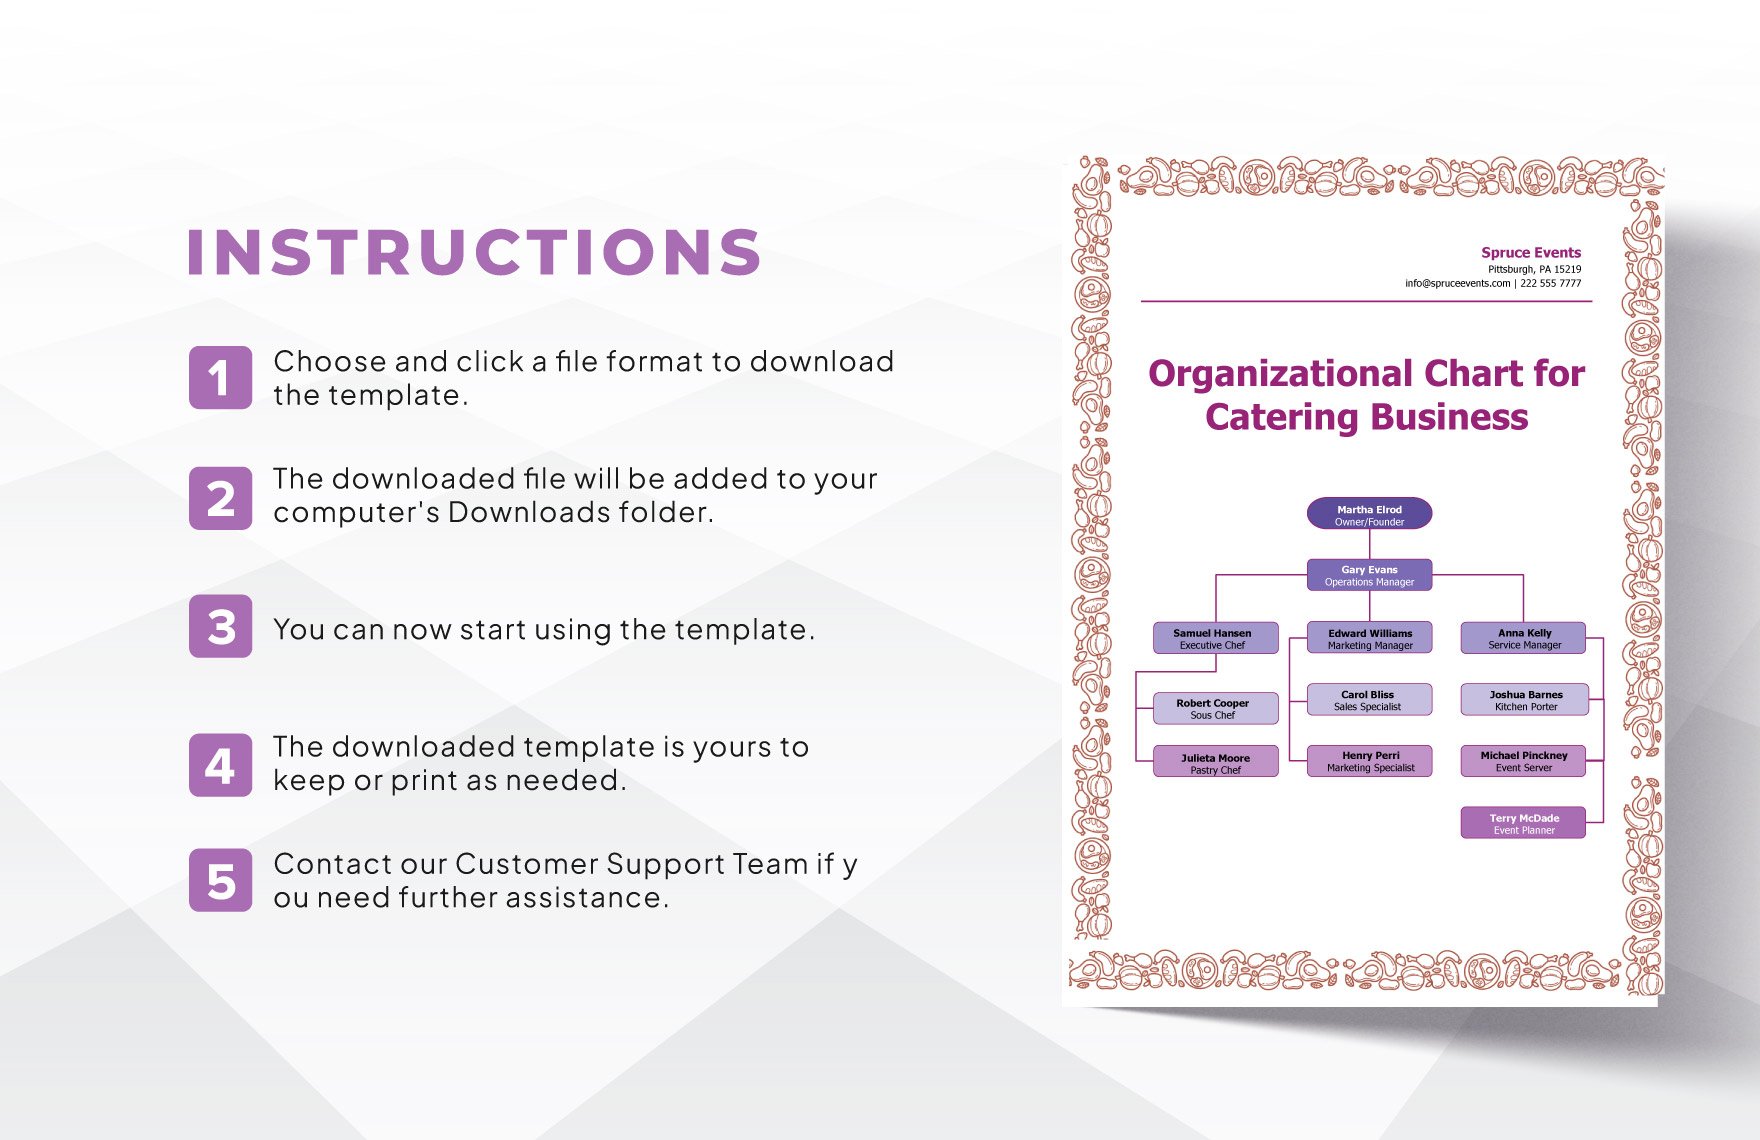 Organizational Chart for Catering Business Template